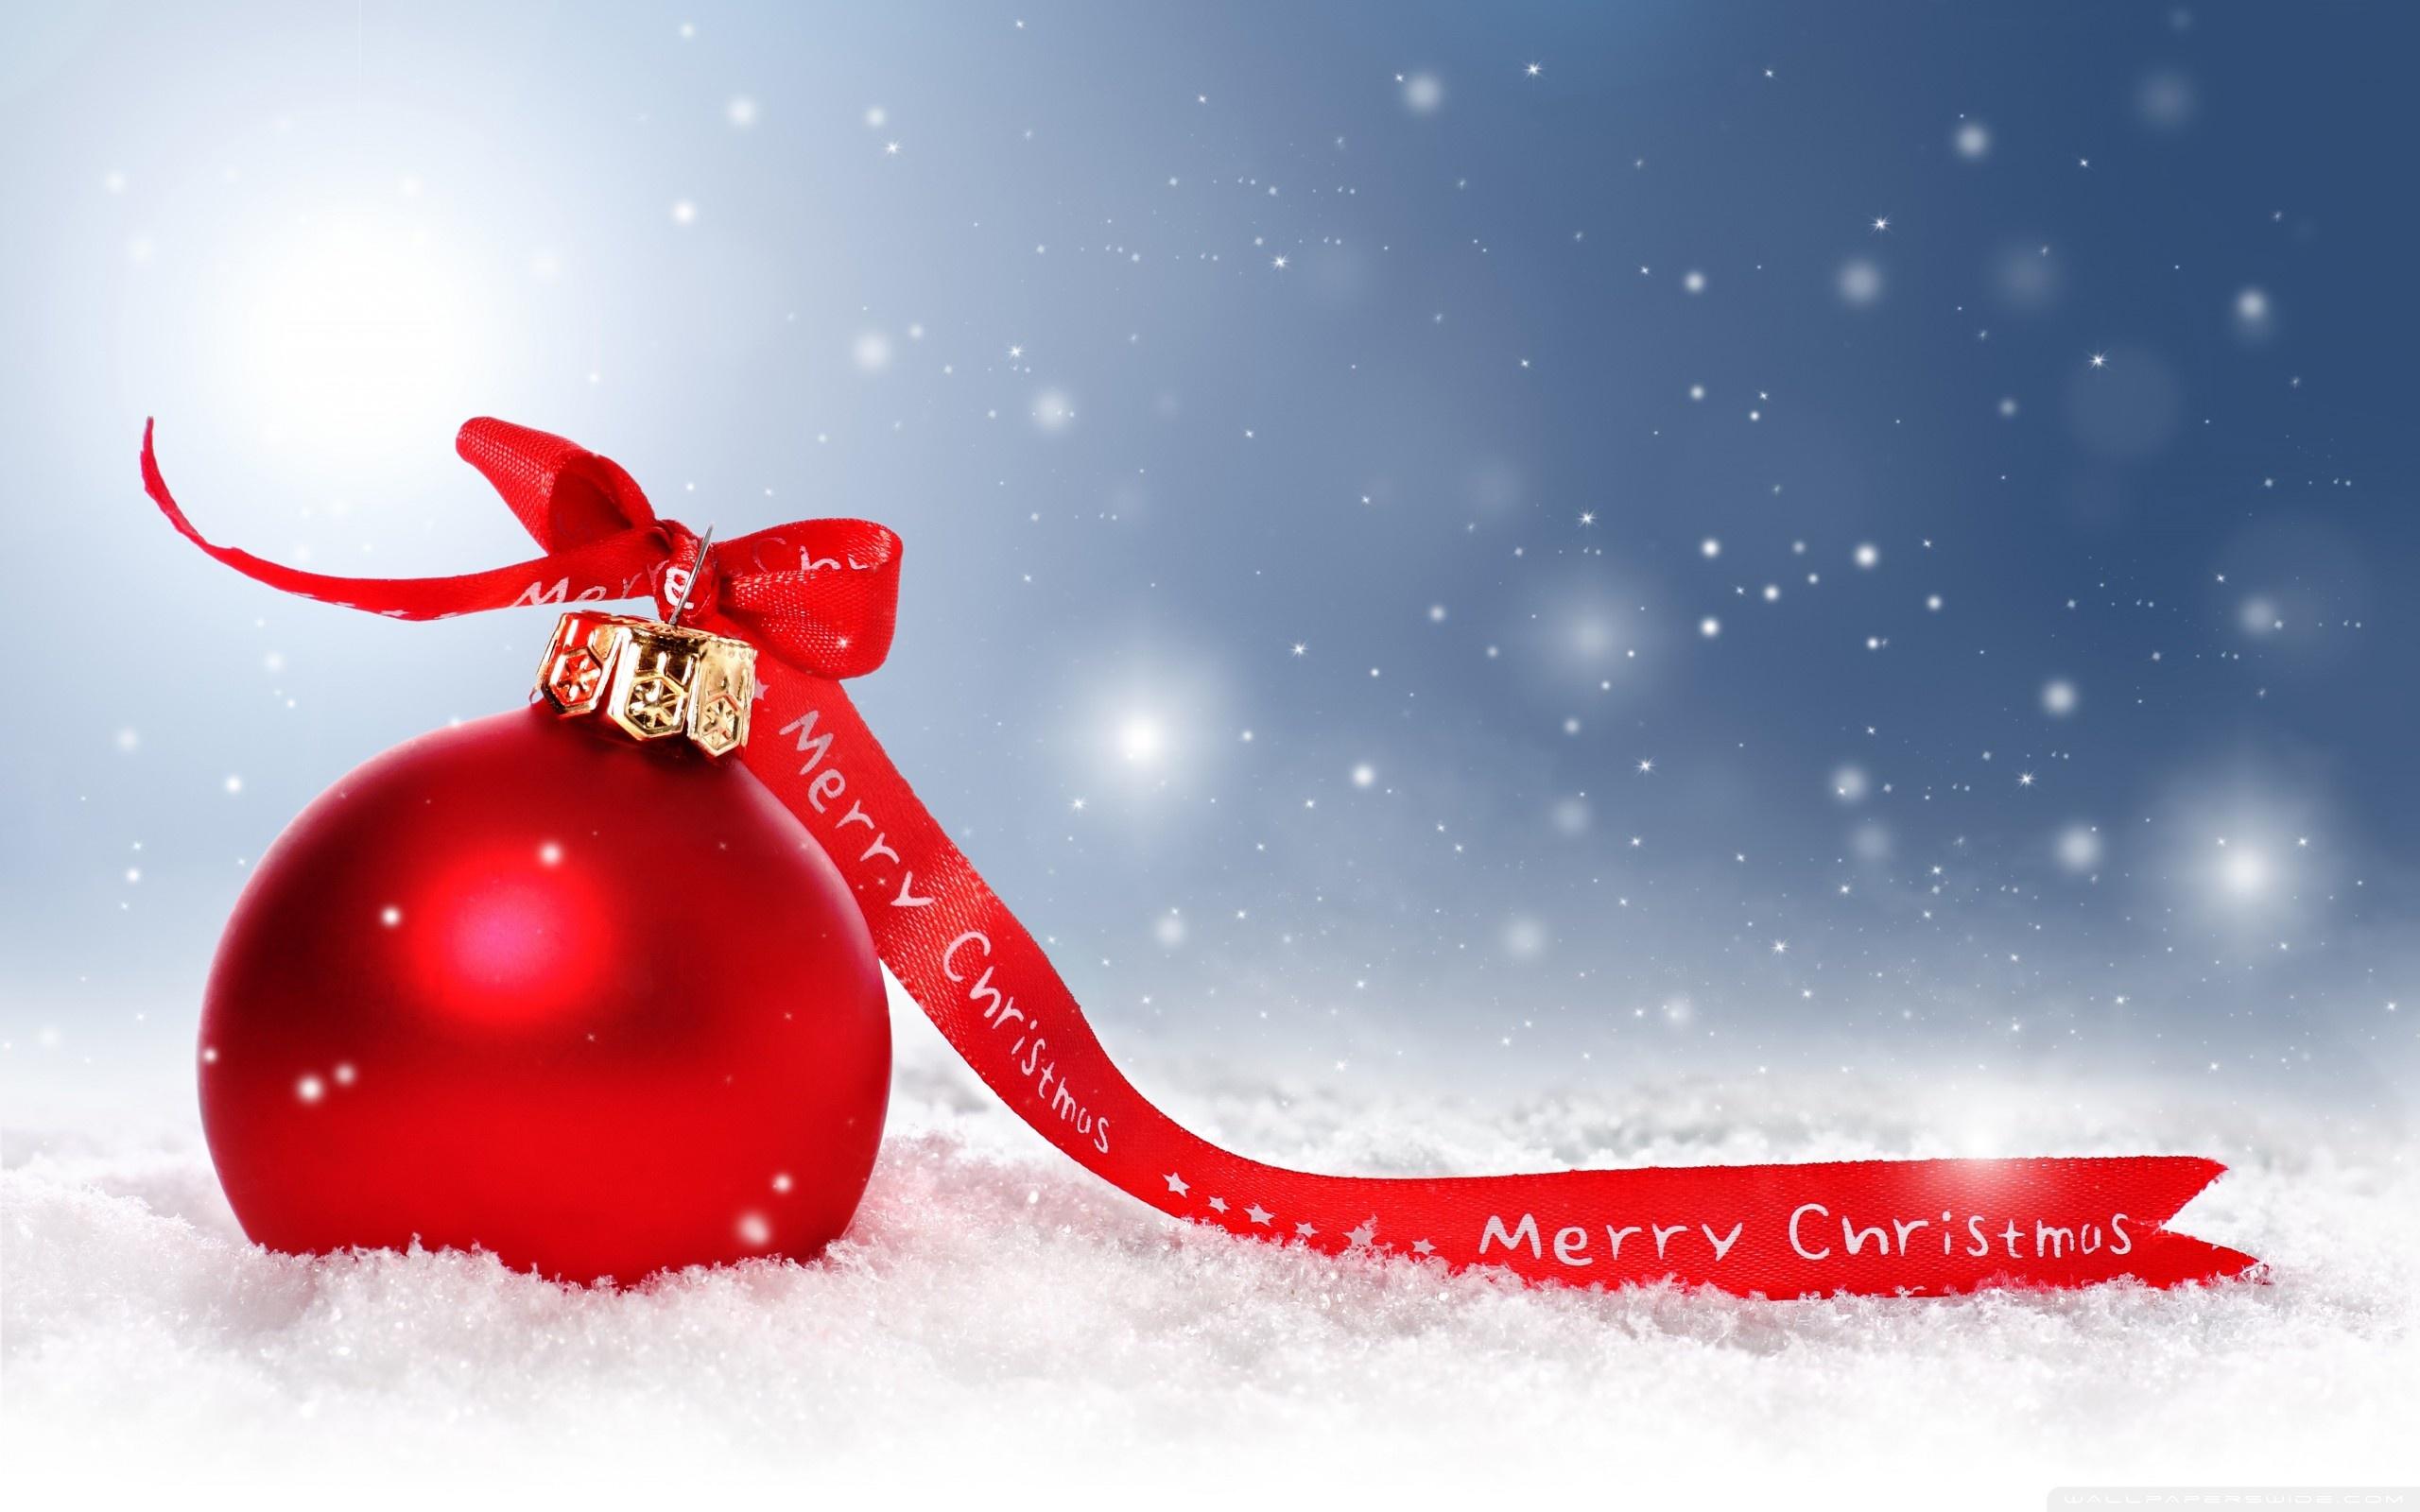 merry-christmas-wallpaper-5-Awesome-Wallpapers